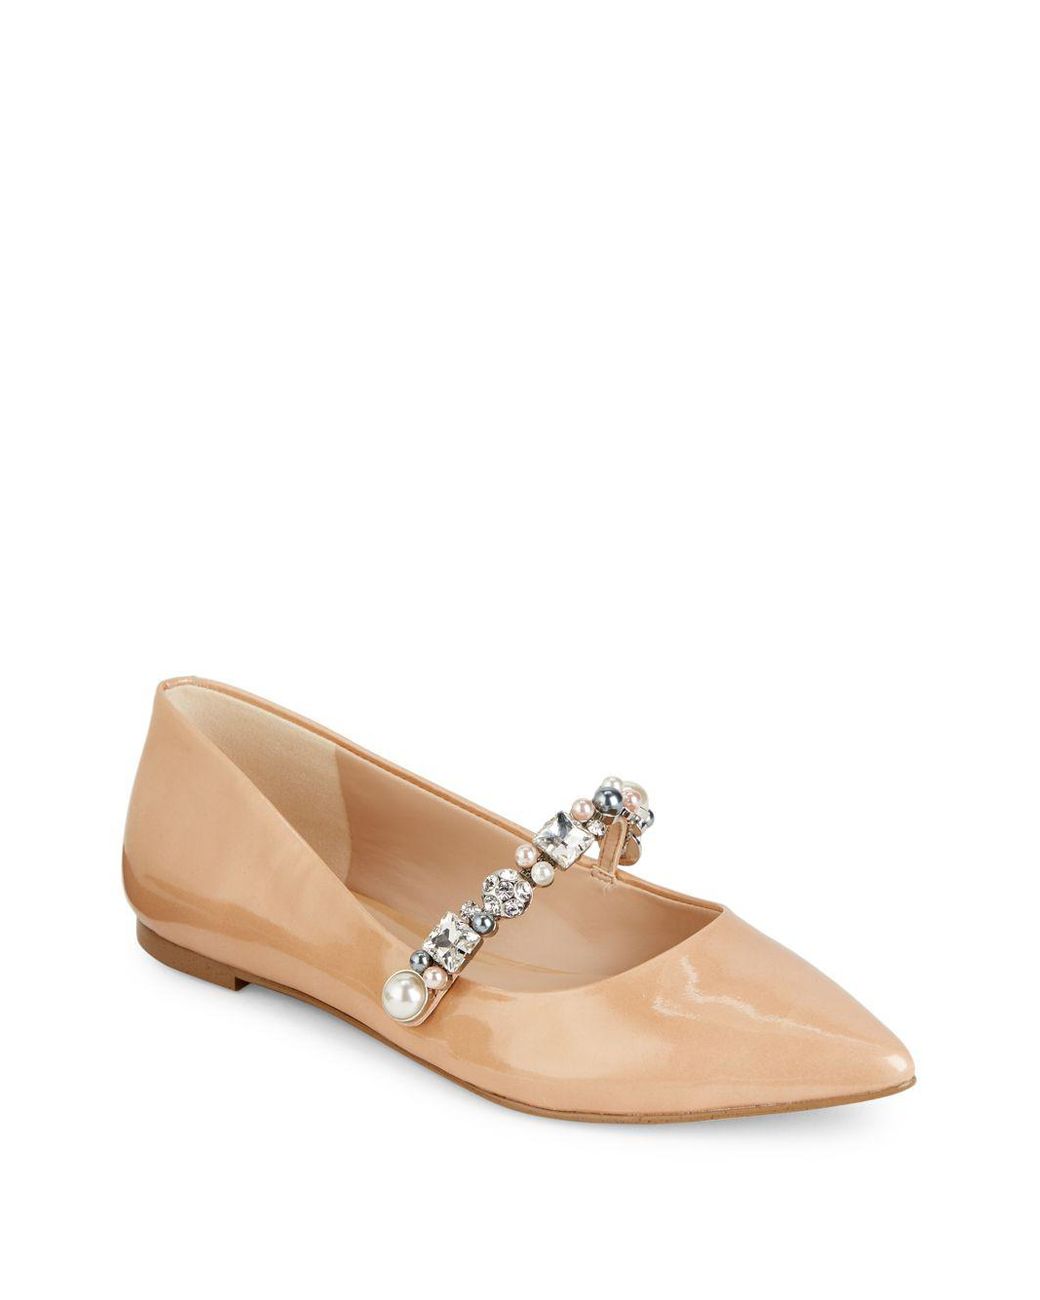 Karl Lagerfeld Noel Embellished Patent Leather Flats in Almond (Natural ...